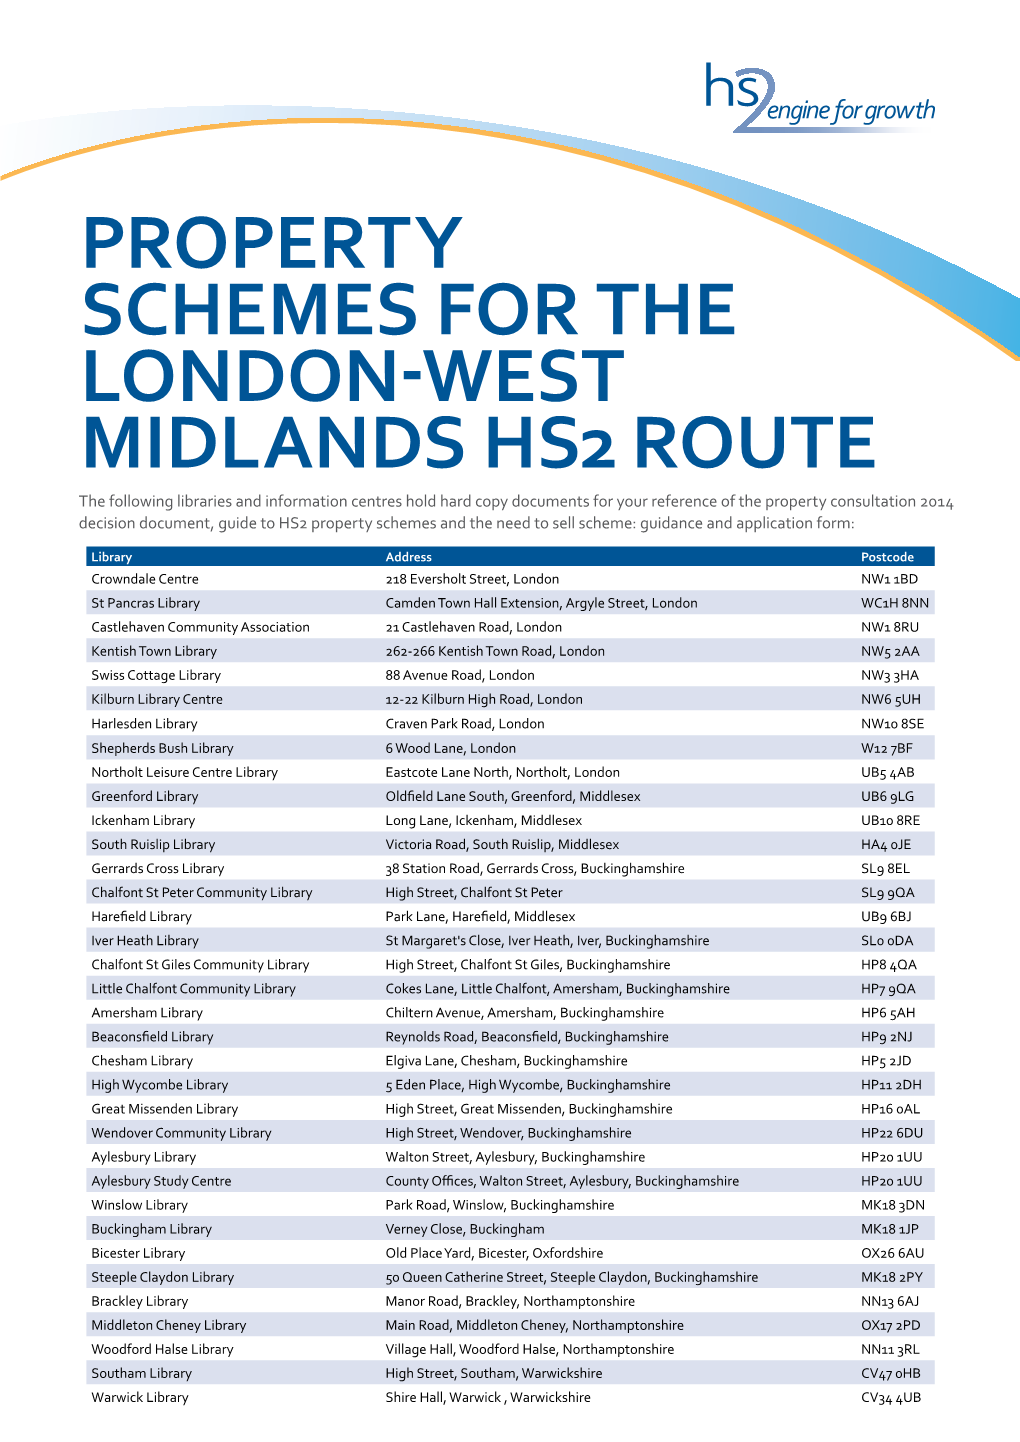 Property Schemes for the London-West Midlands Hs2 Route